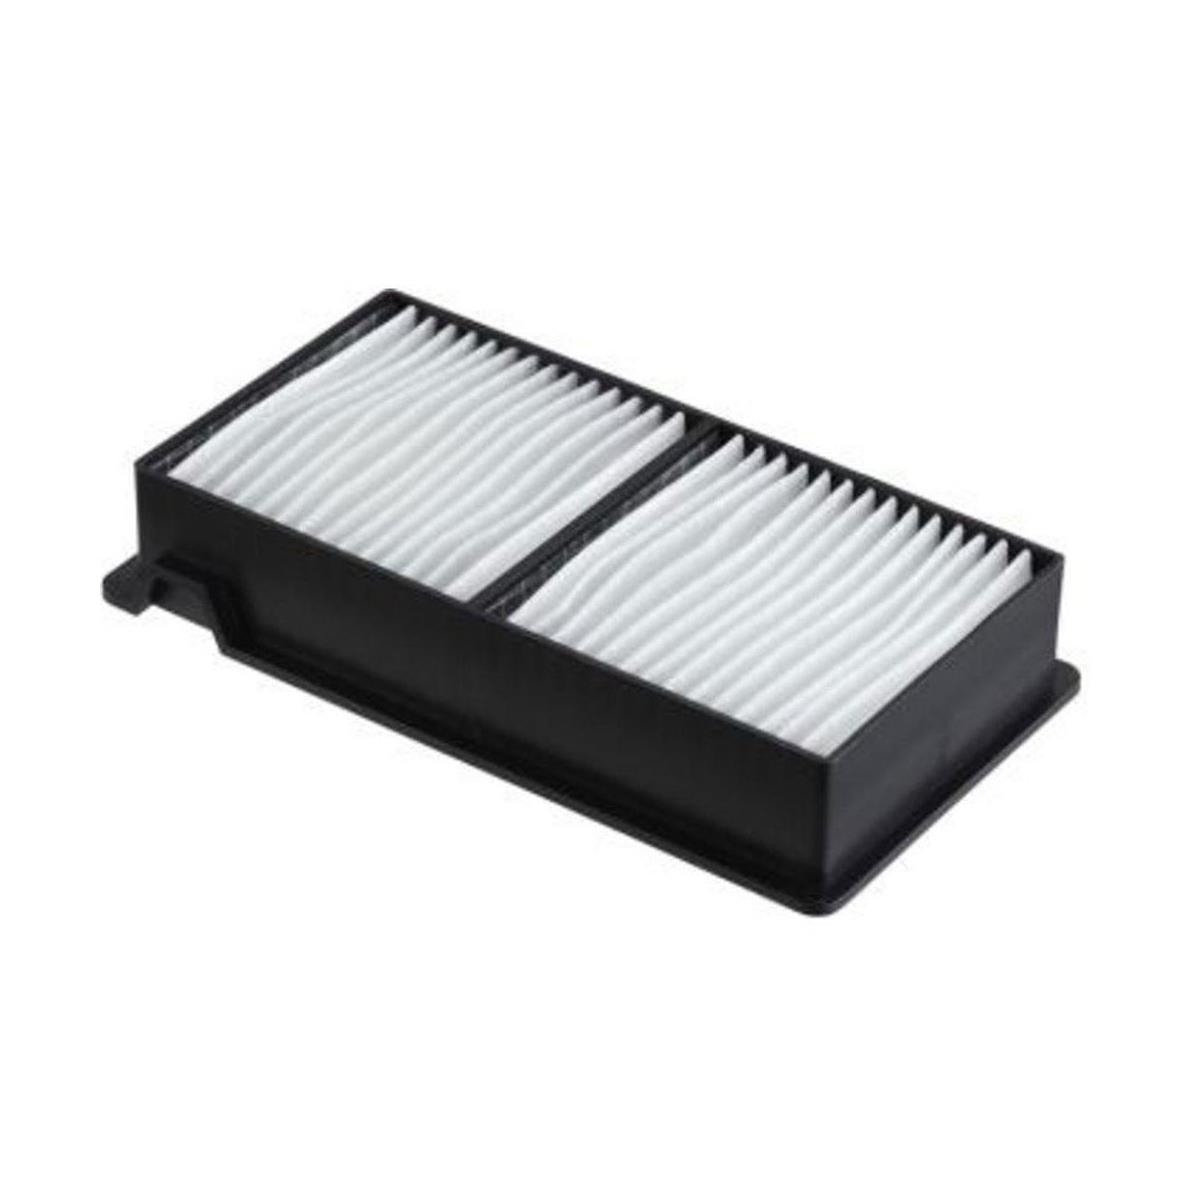 

Epson V13H134A39 Replacement Air Filter